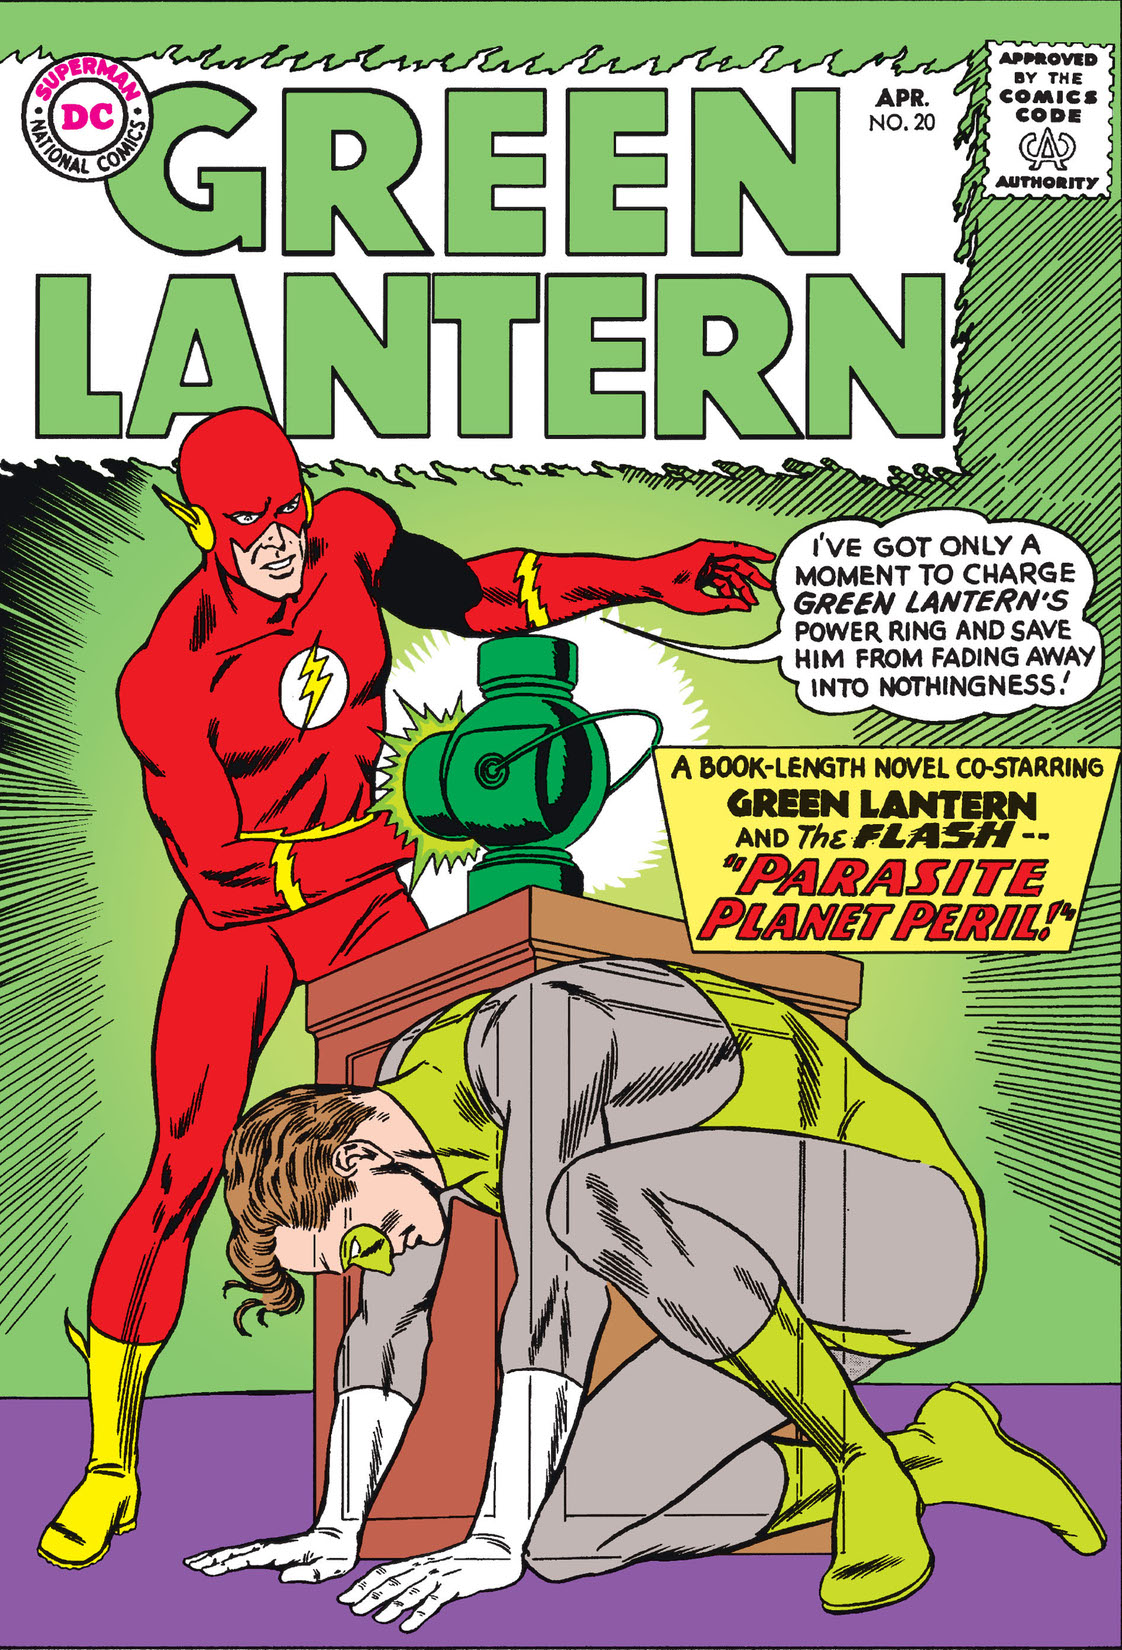 Green Lantern (1960-) #20 preview images